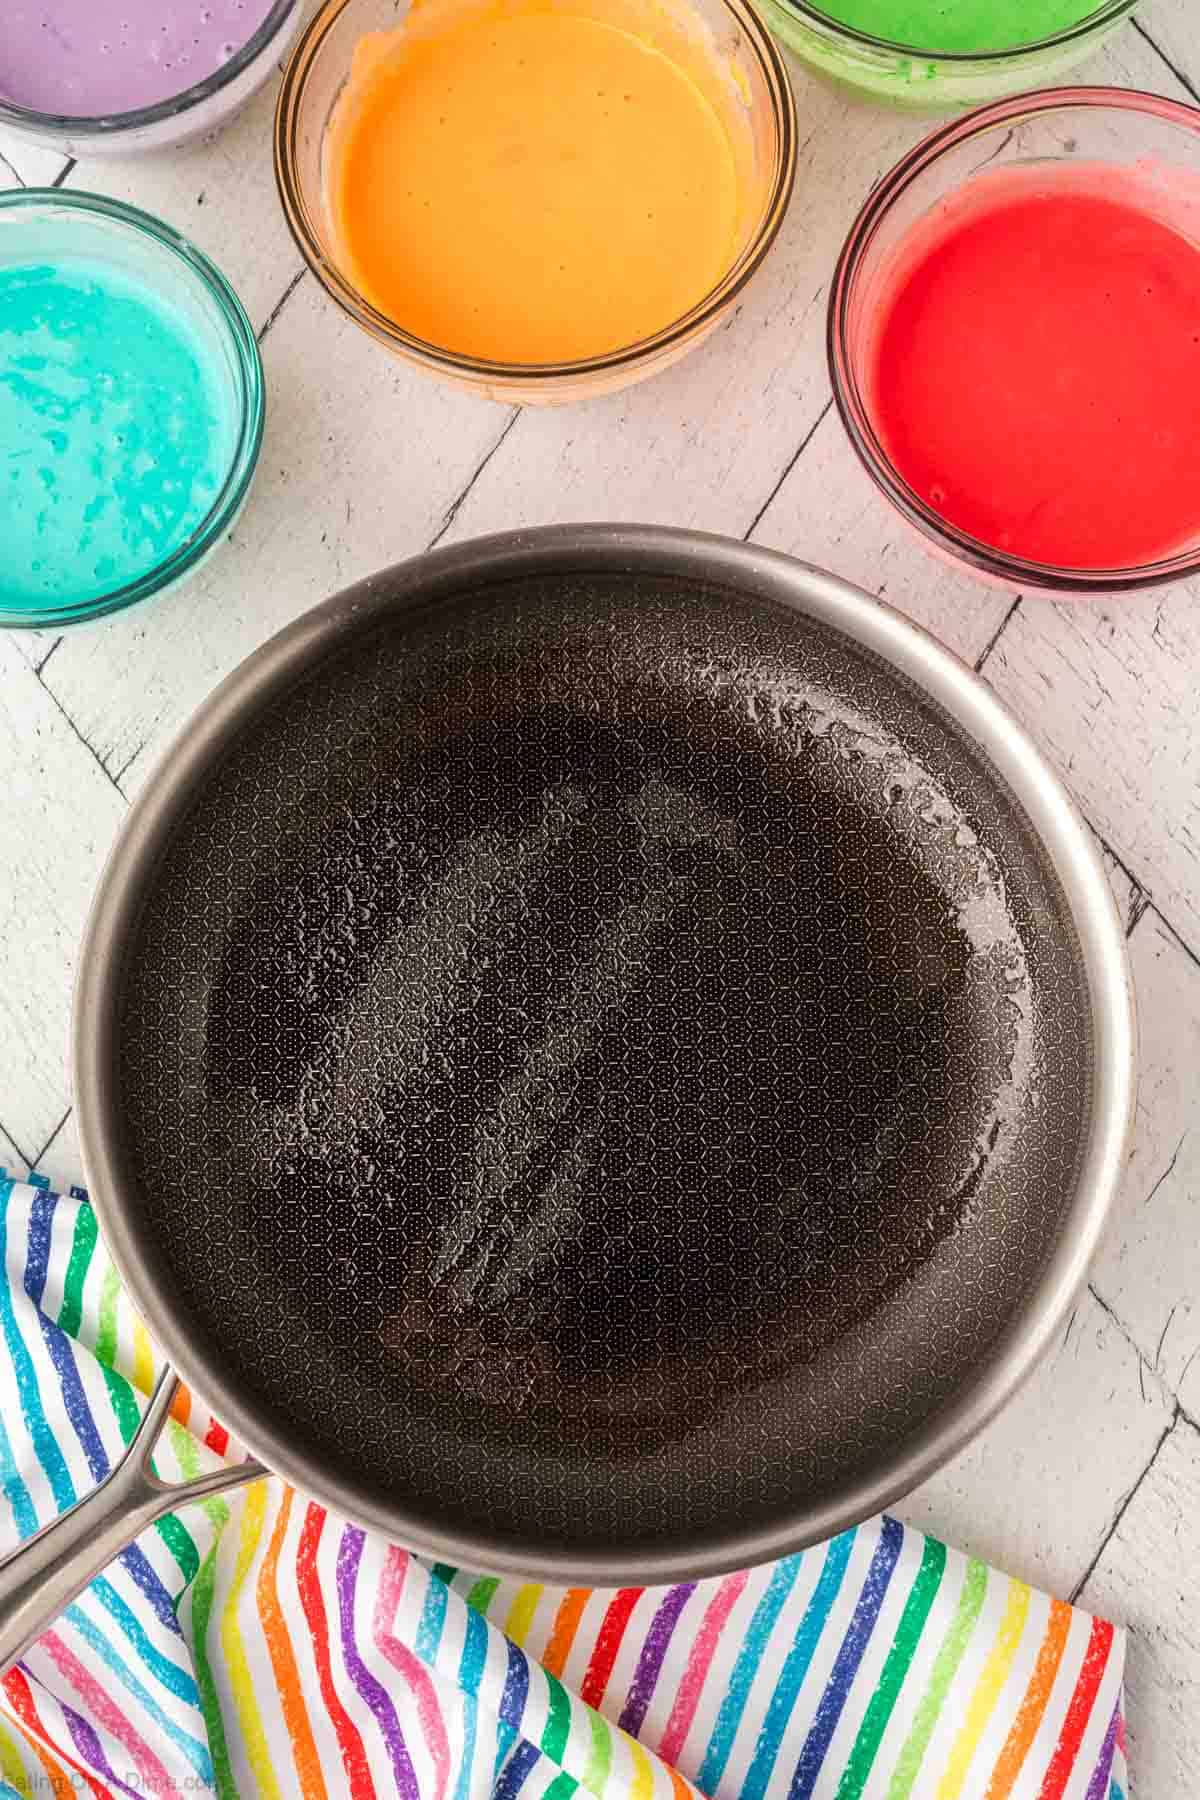 Heating skillet with butter